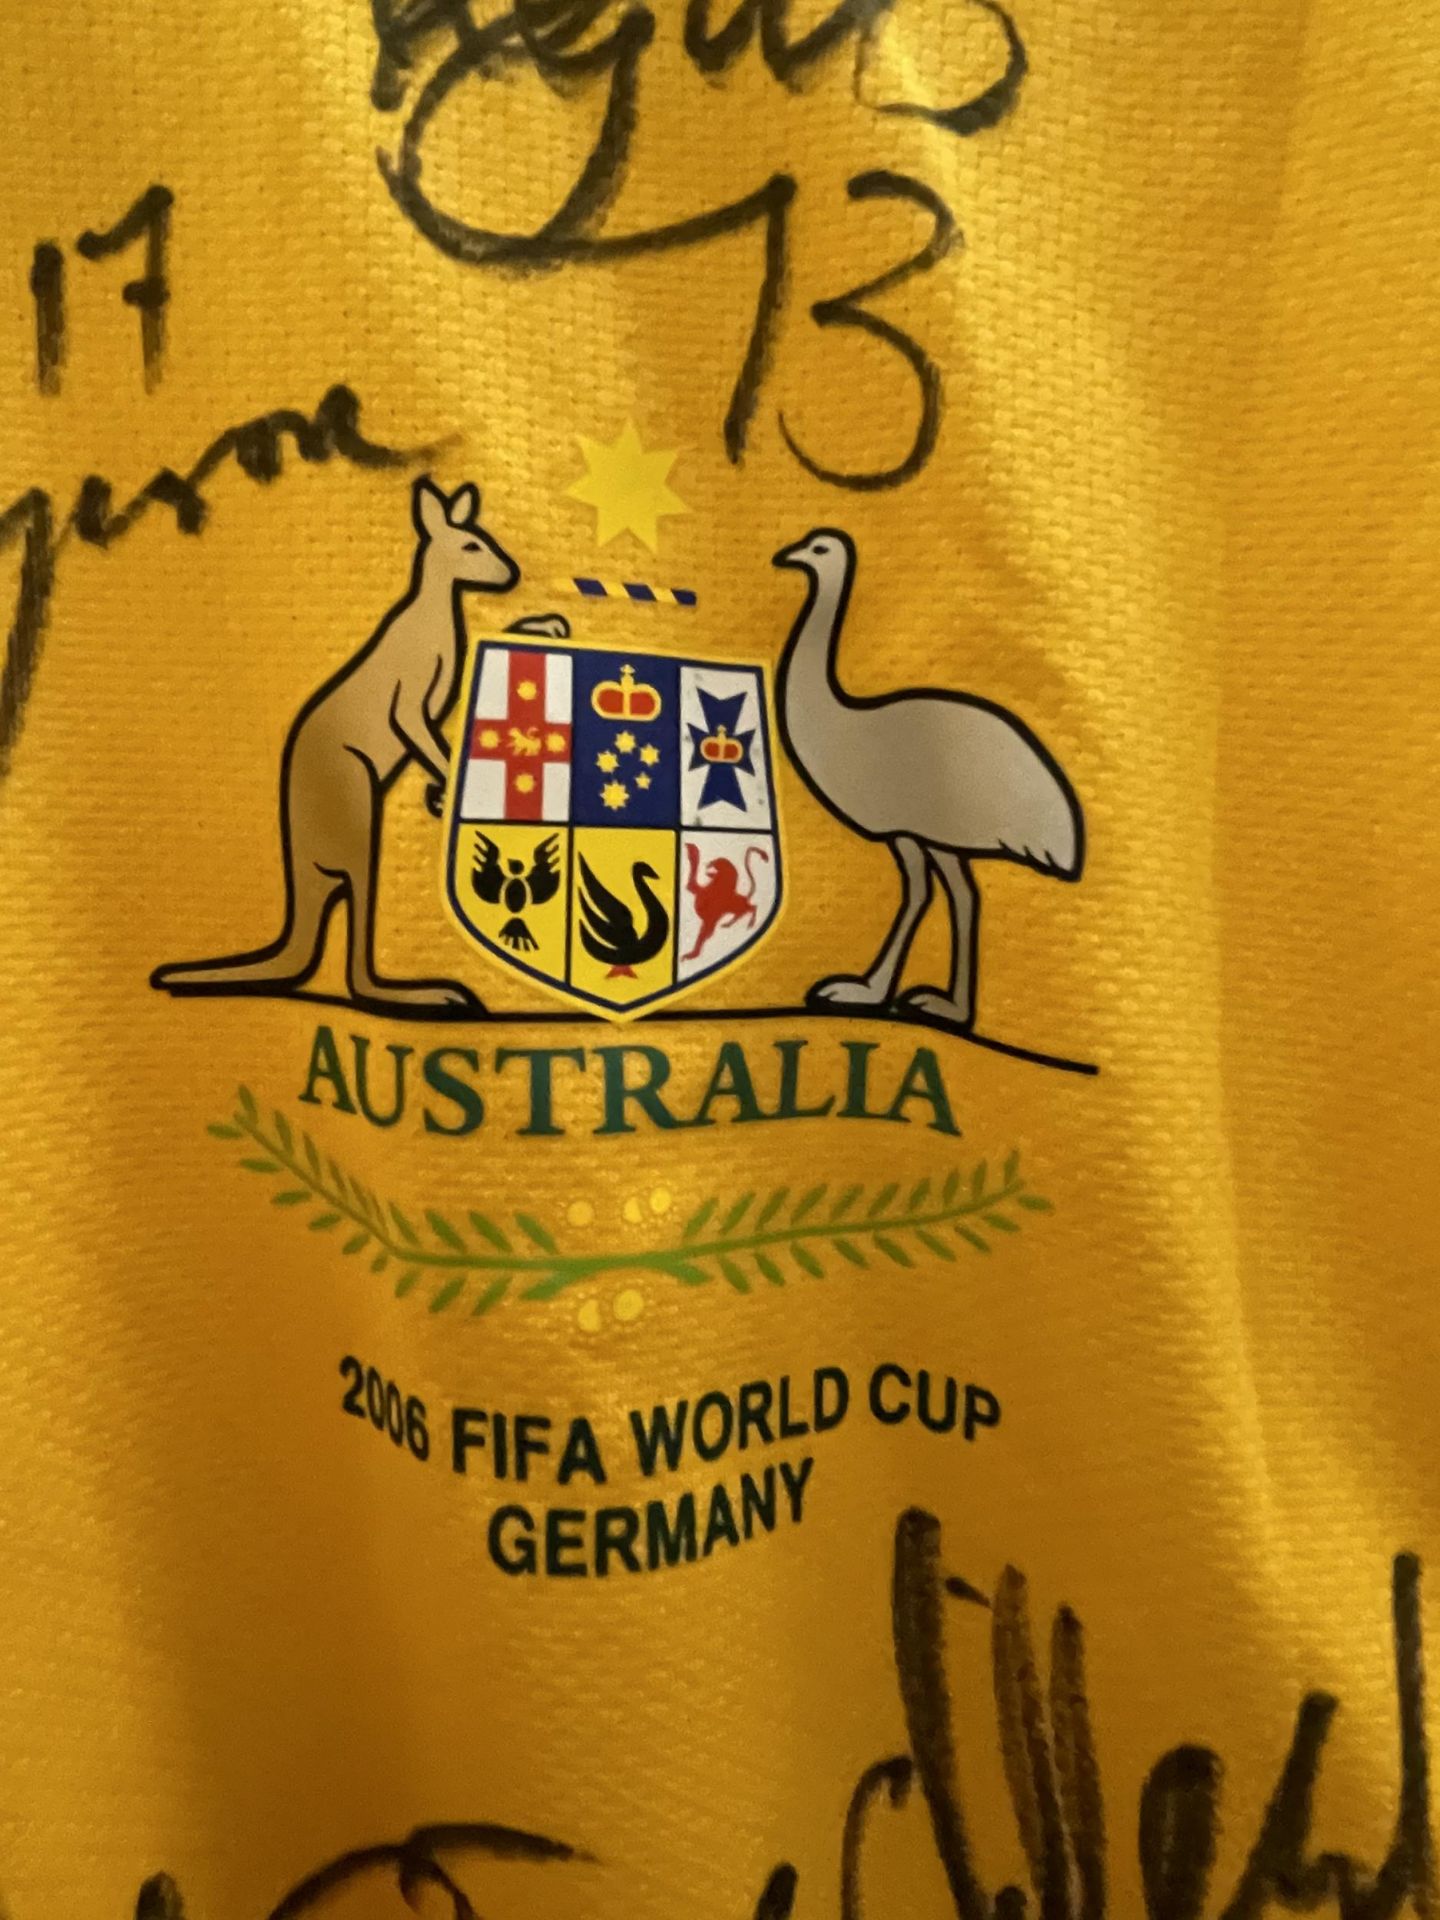 A SIGNED AUSTRALIAN FIFA 2006 WORLD CUP, GERMANY SHIRT - Image 2 of 7